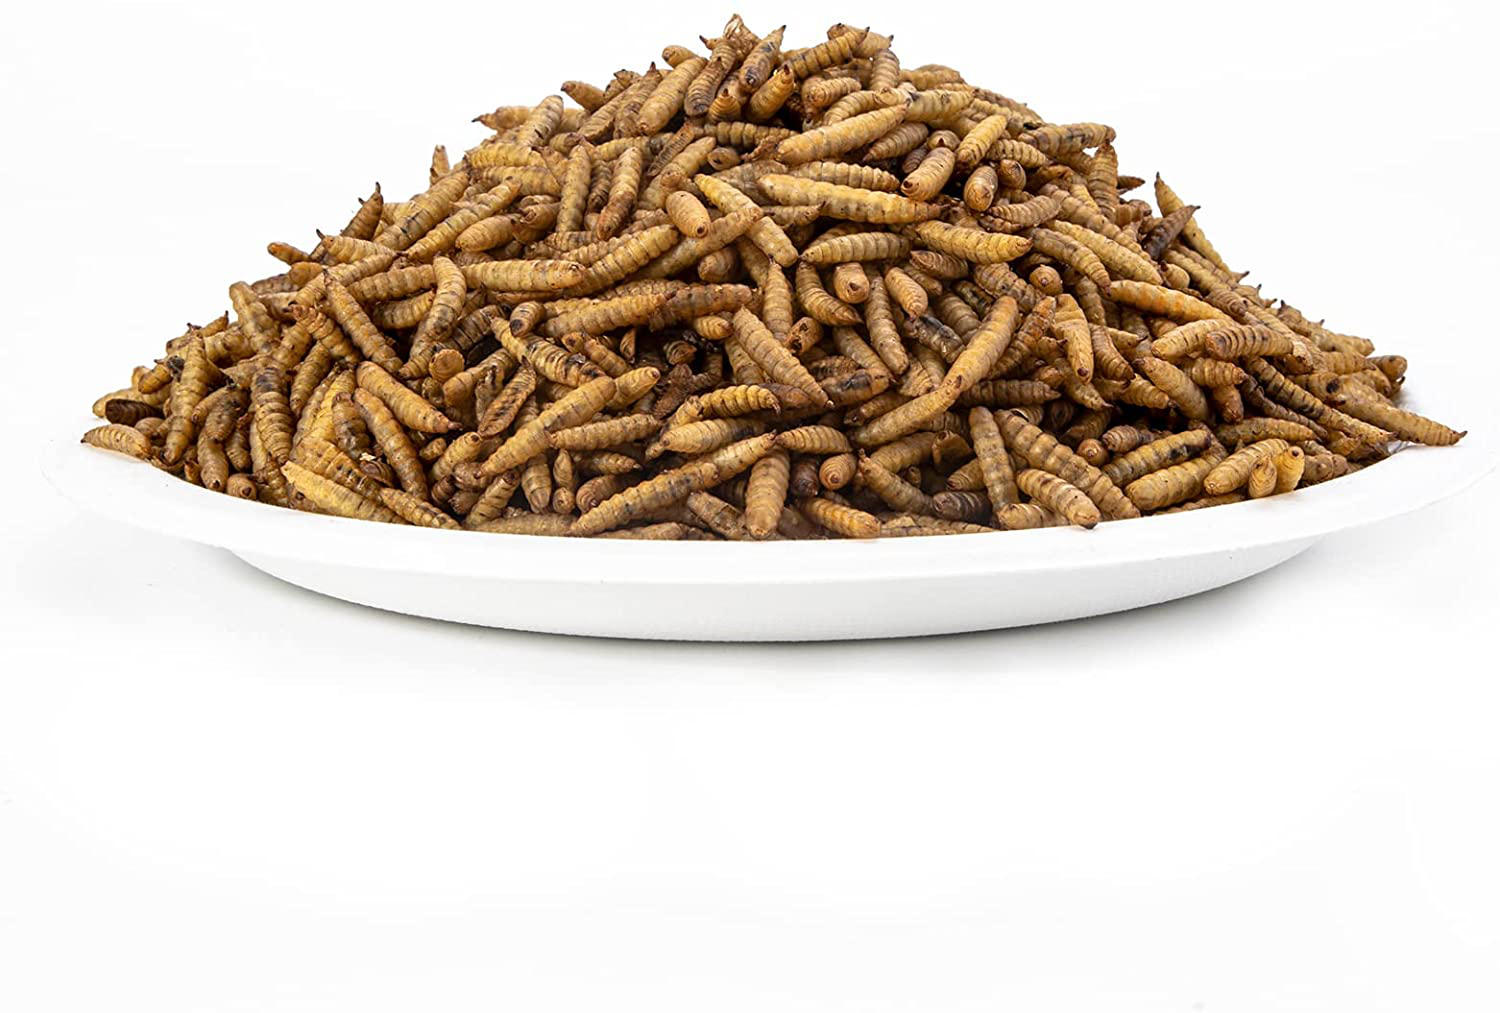 GOLDWORMS Superior to Dried Mealworms for Chickens - Non-Gmo Dried Black Soldier Fly Larvae - 85X More Calcium than Meal Worms - BSF Larvae Treats for Wild Birds, Hens, Ducks, Reptiles